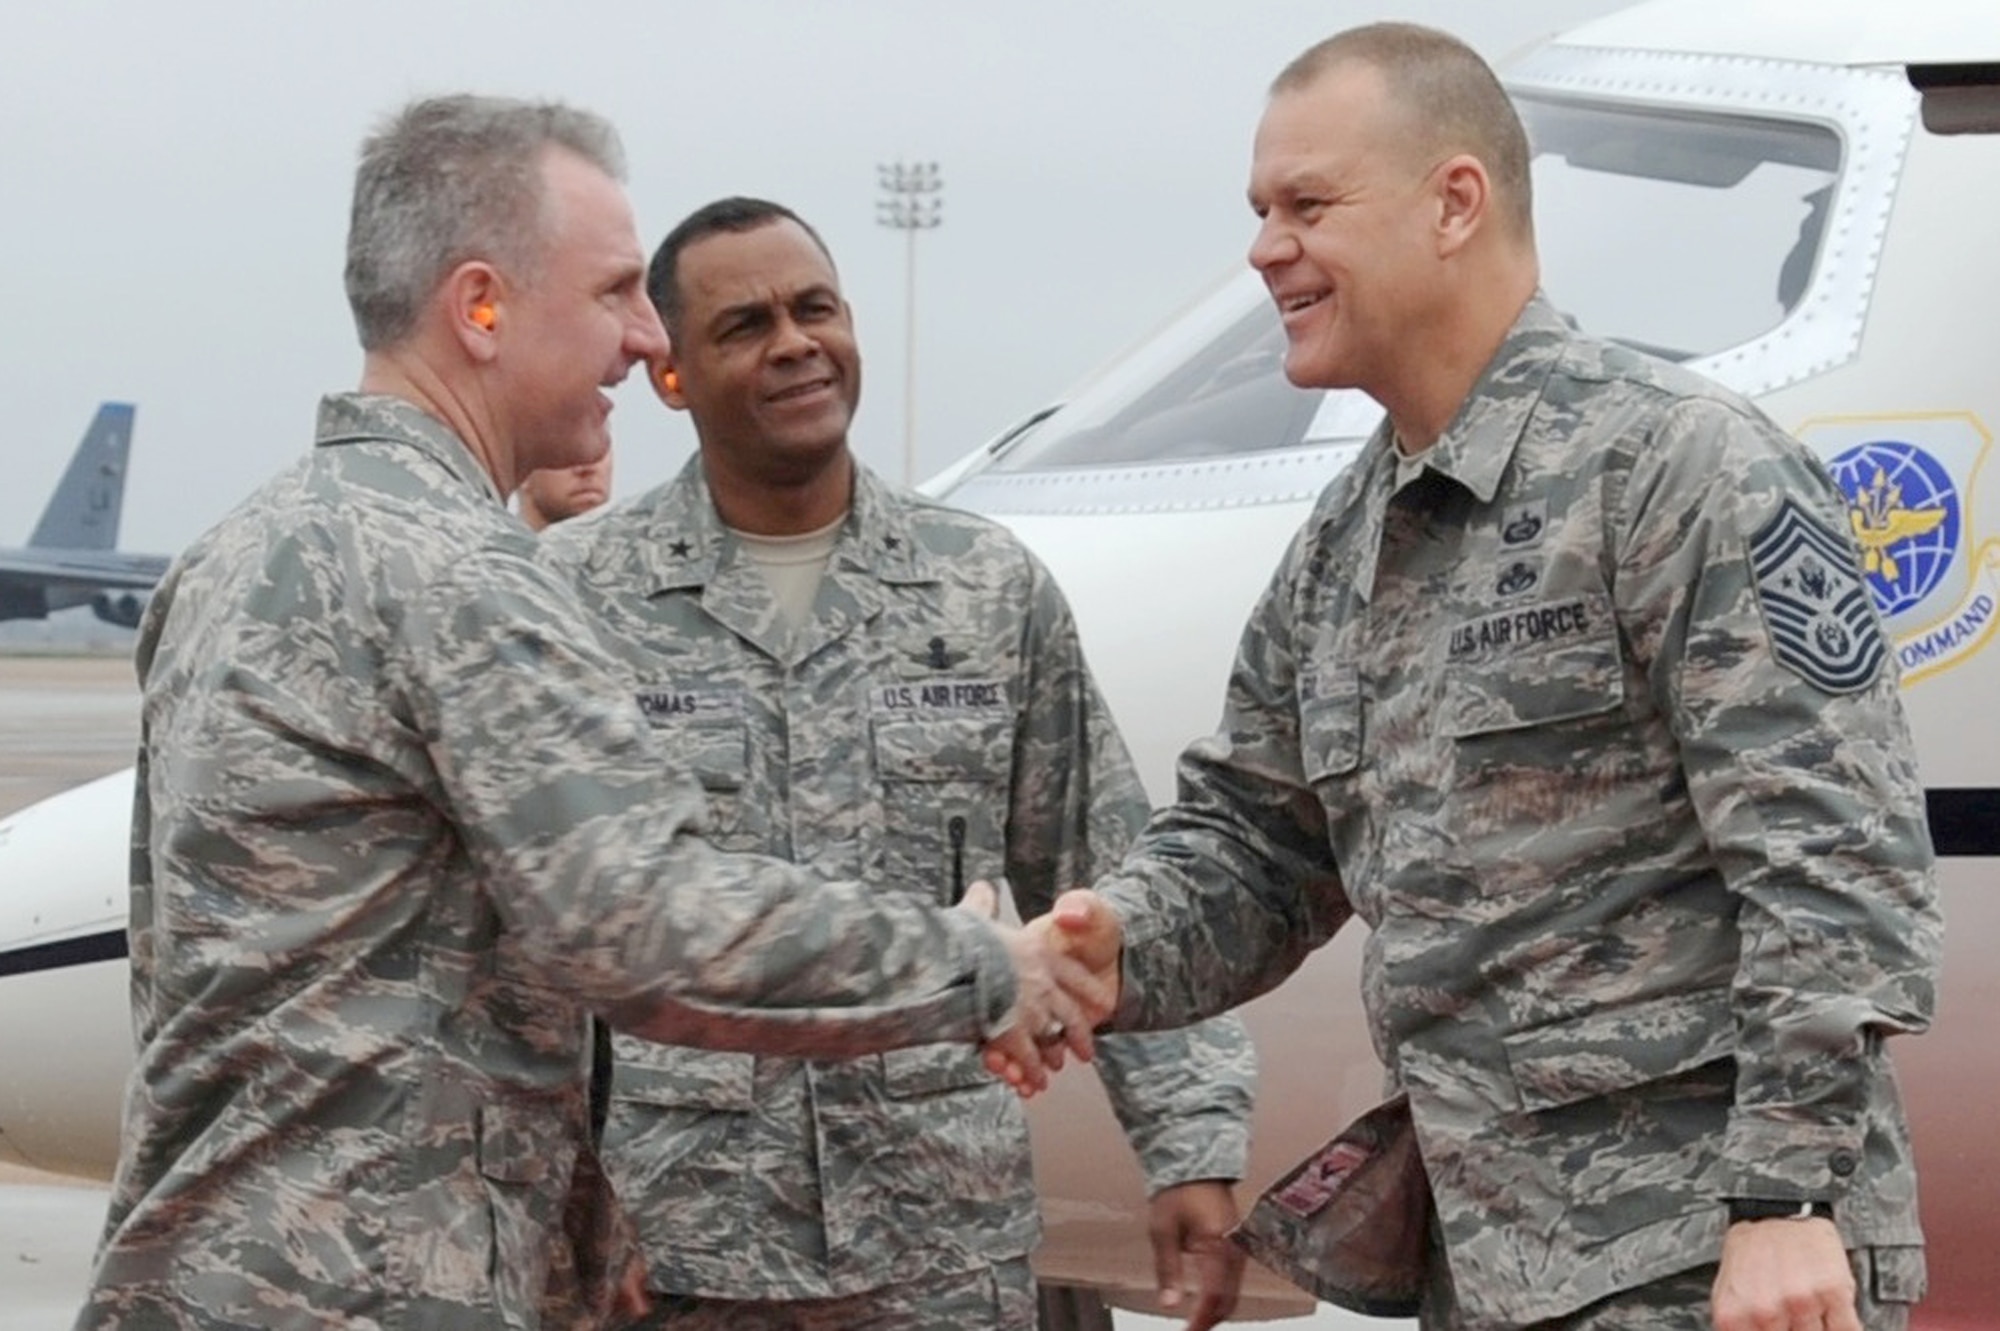 Col. Tim Fay with Brig. Gen. Everett Thomas greets Chief Master Sgt. of the Air Force James A. Roy upon his arrival to Barksdale Air Force Base, La., March 8, 2011. Colonel Fay is the the 2nd Bomb Wing commander. General Thomas is the Air Force Global Strike Command vice commander. (U.S. Air Force photo/Senior Airman Alexandra M. Boutte)